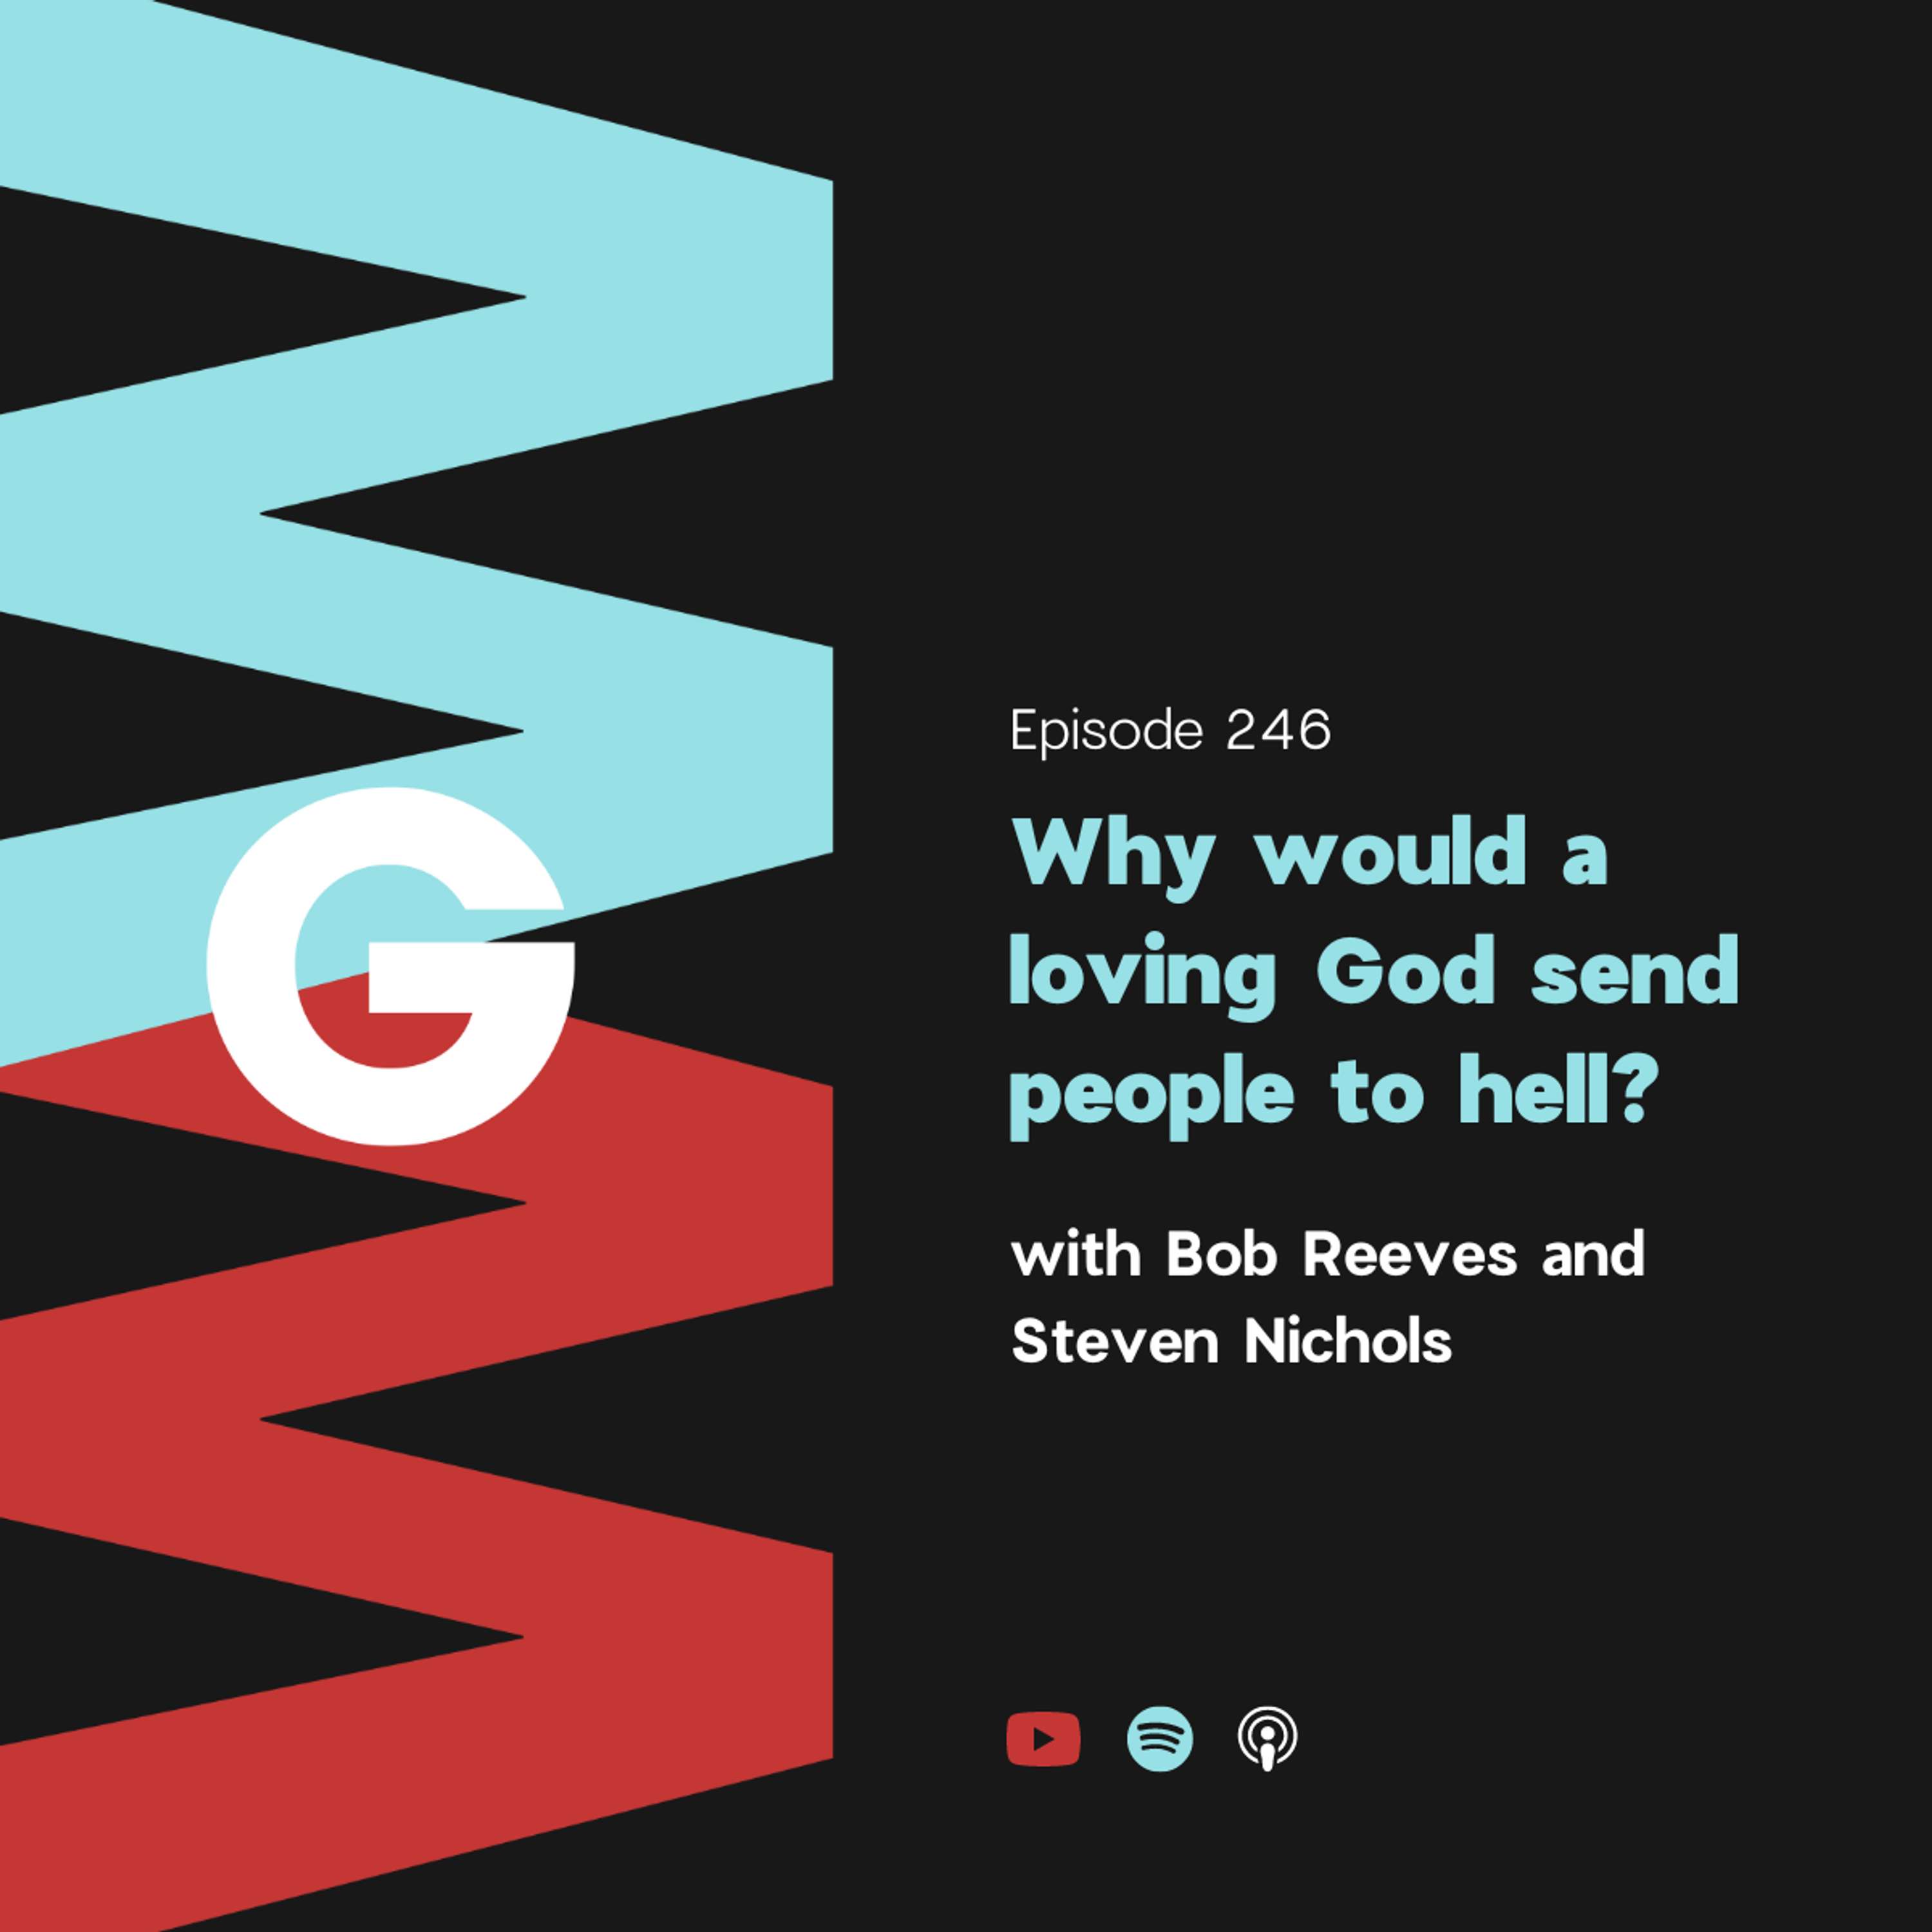 Steve Nichols and Bob Reeves - Why would a loving God send people to hell?